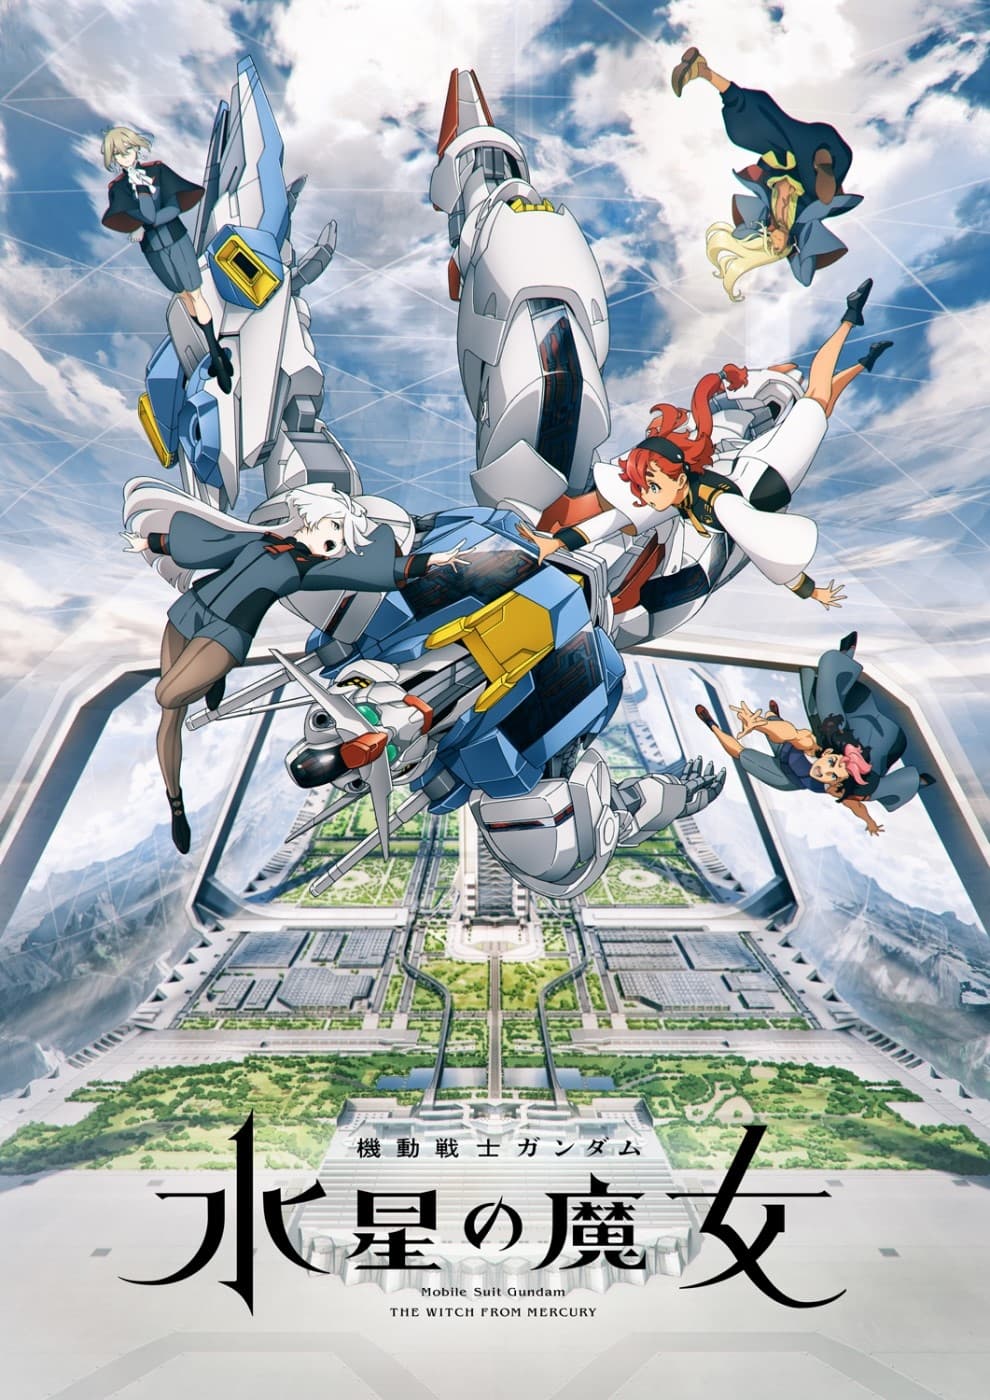 Assistir Mobile Suit Gundam The Witch from Mercury  Todos os Episódios  Online Completo